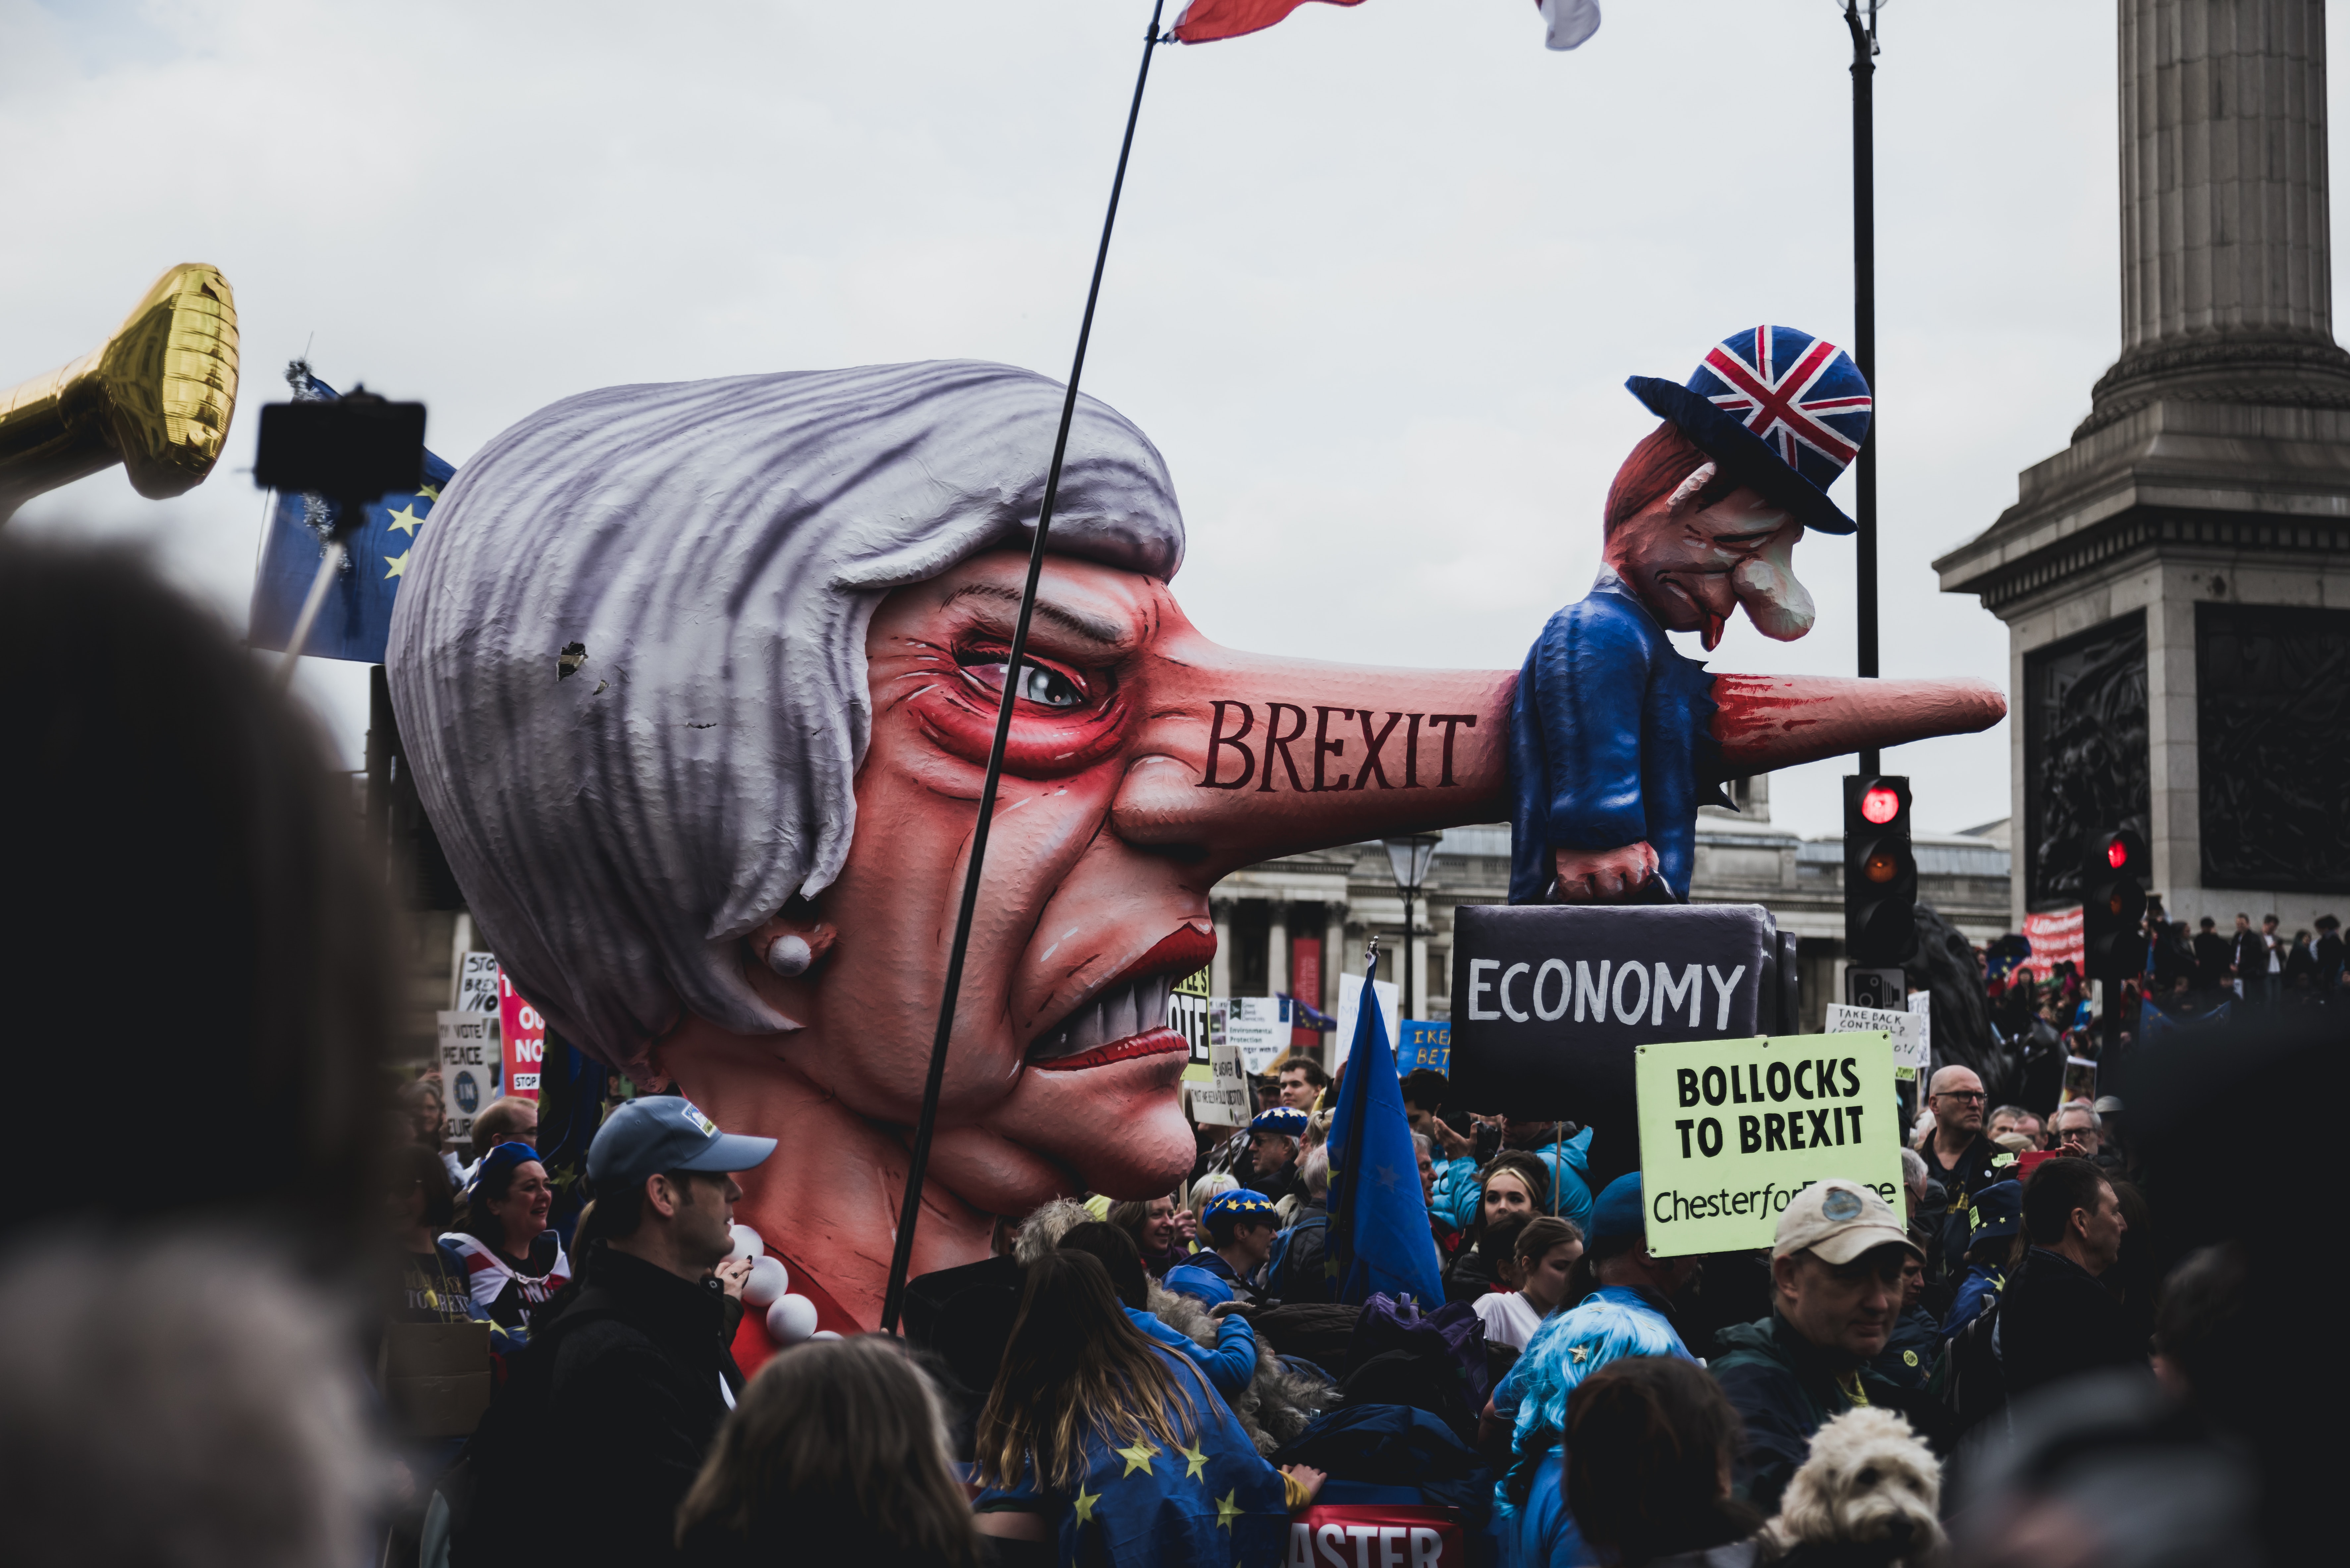 March in London, 25 March 2019, Photo by Alexander Andrews on Unsplash